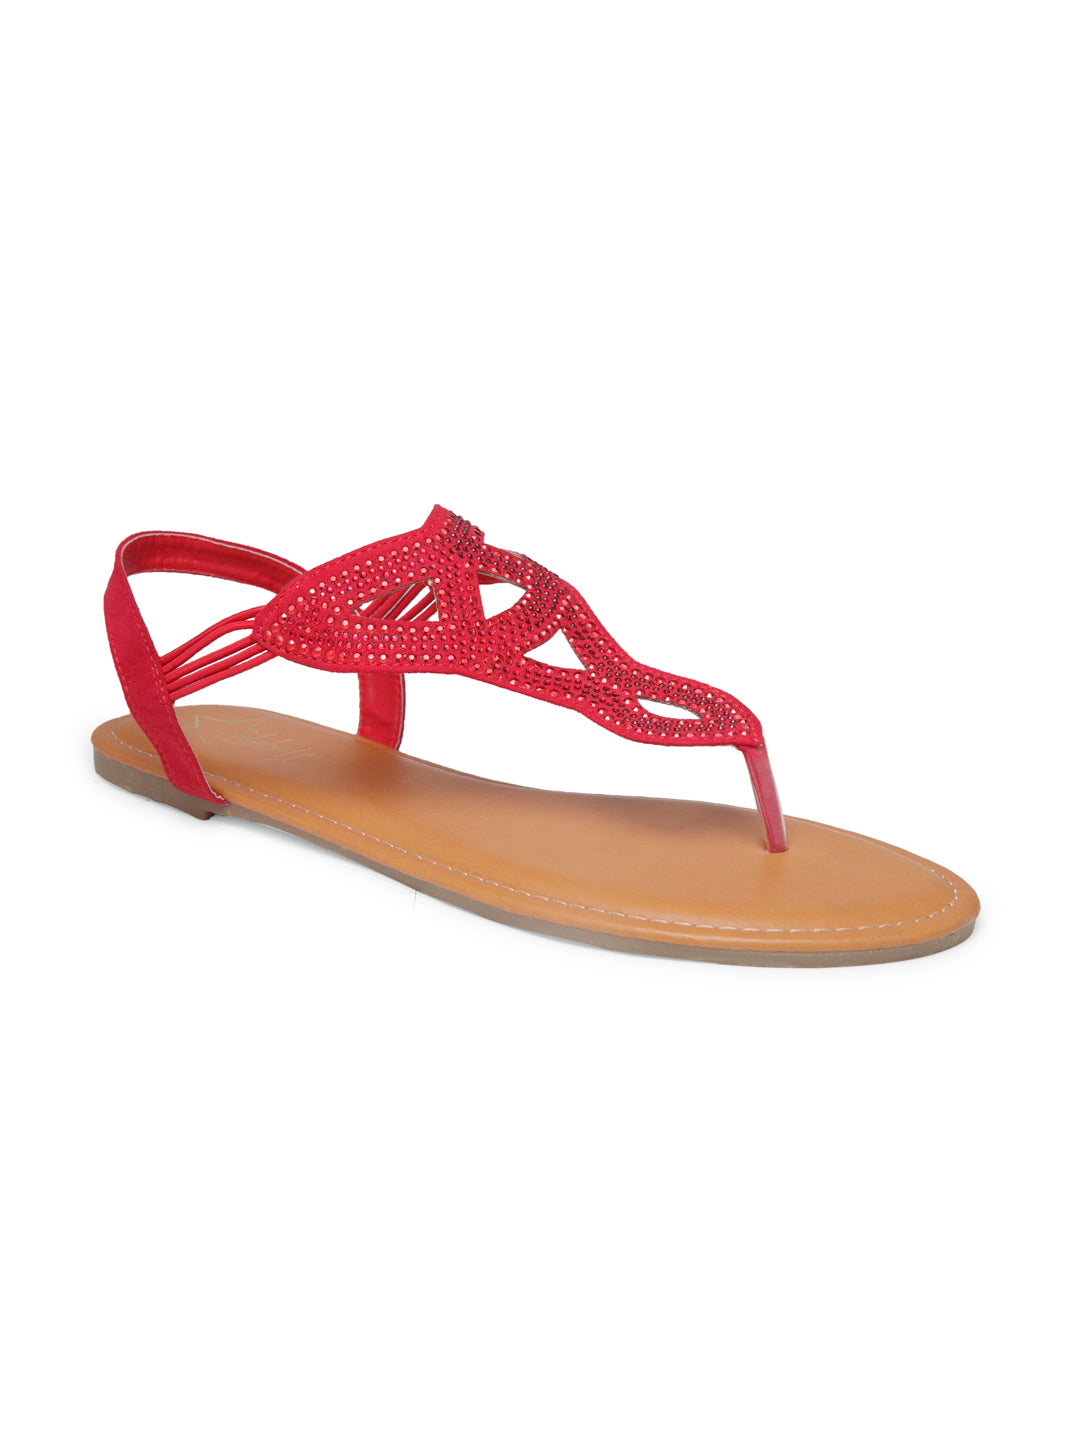 Red Flat Sandals